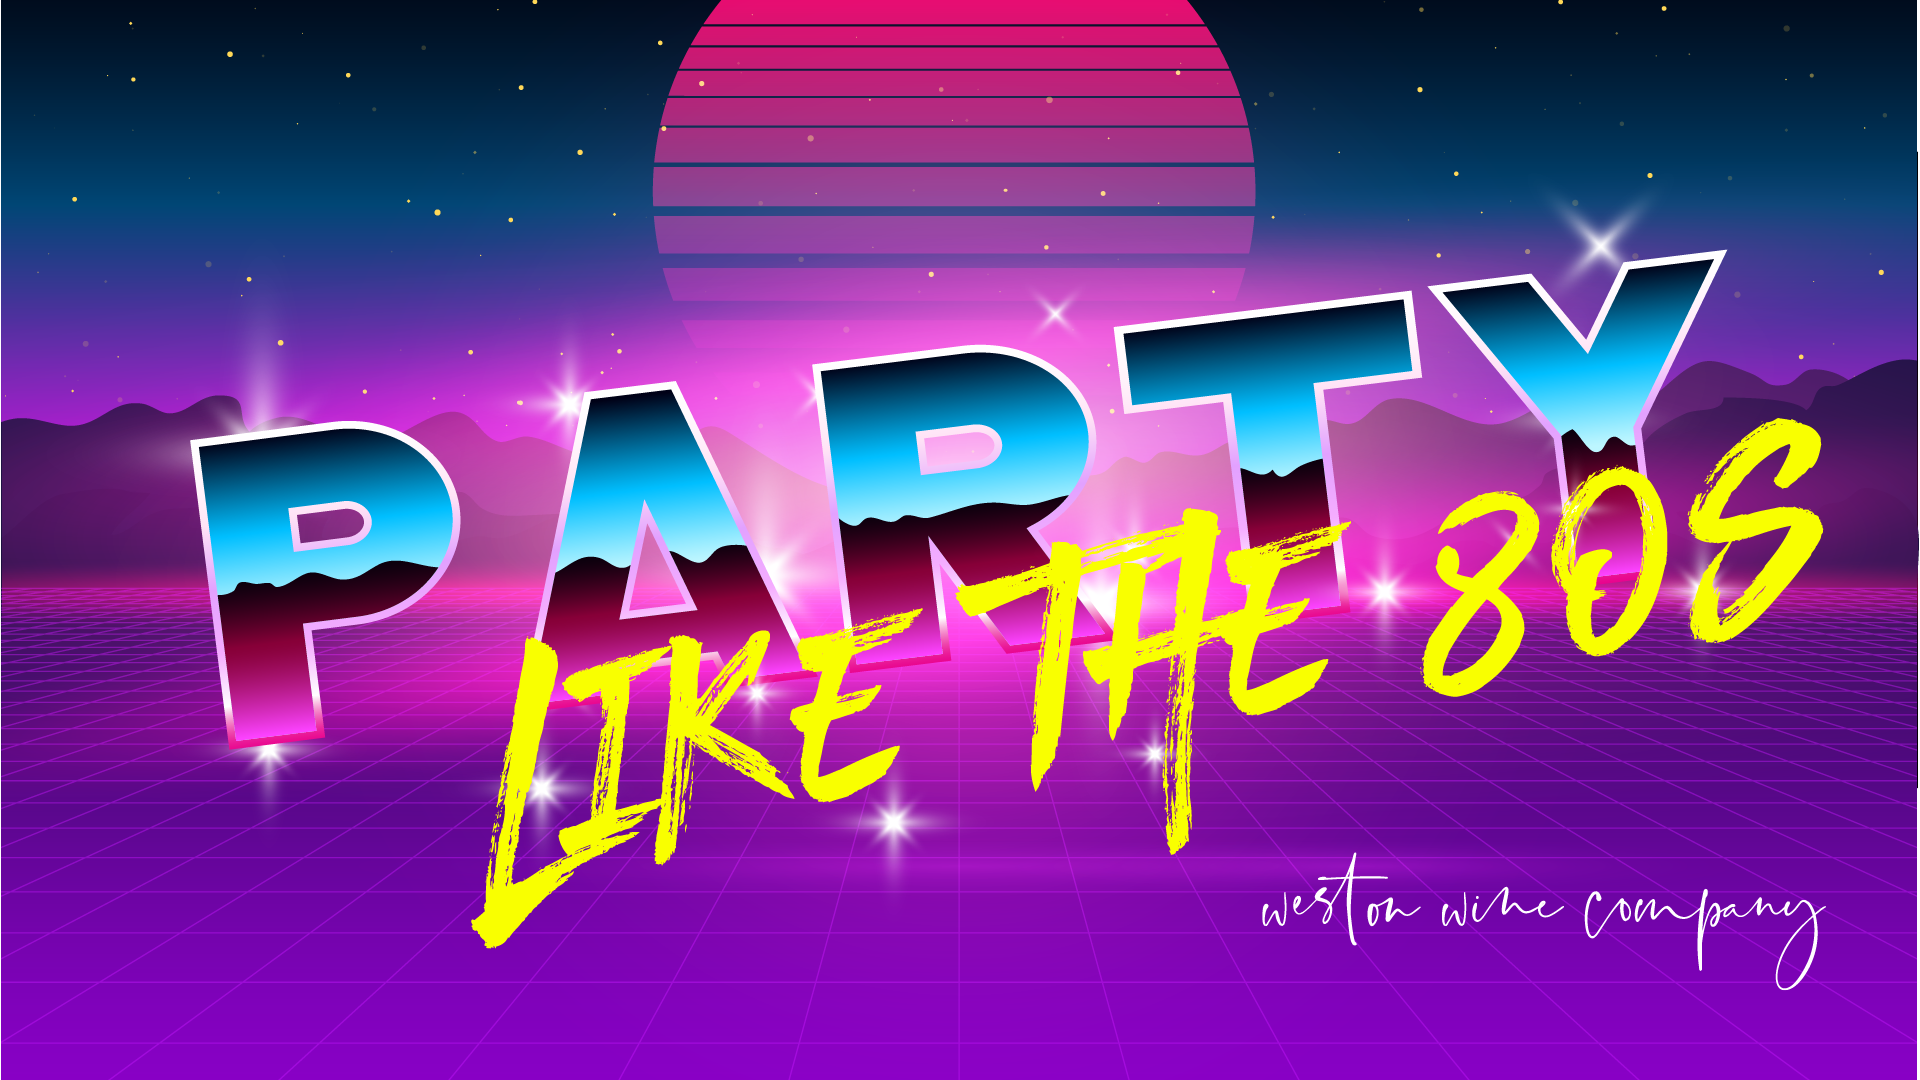 80S Party Wallpapers